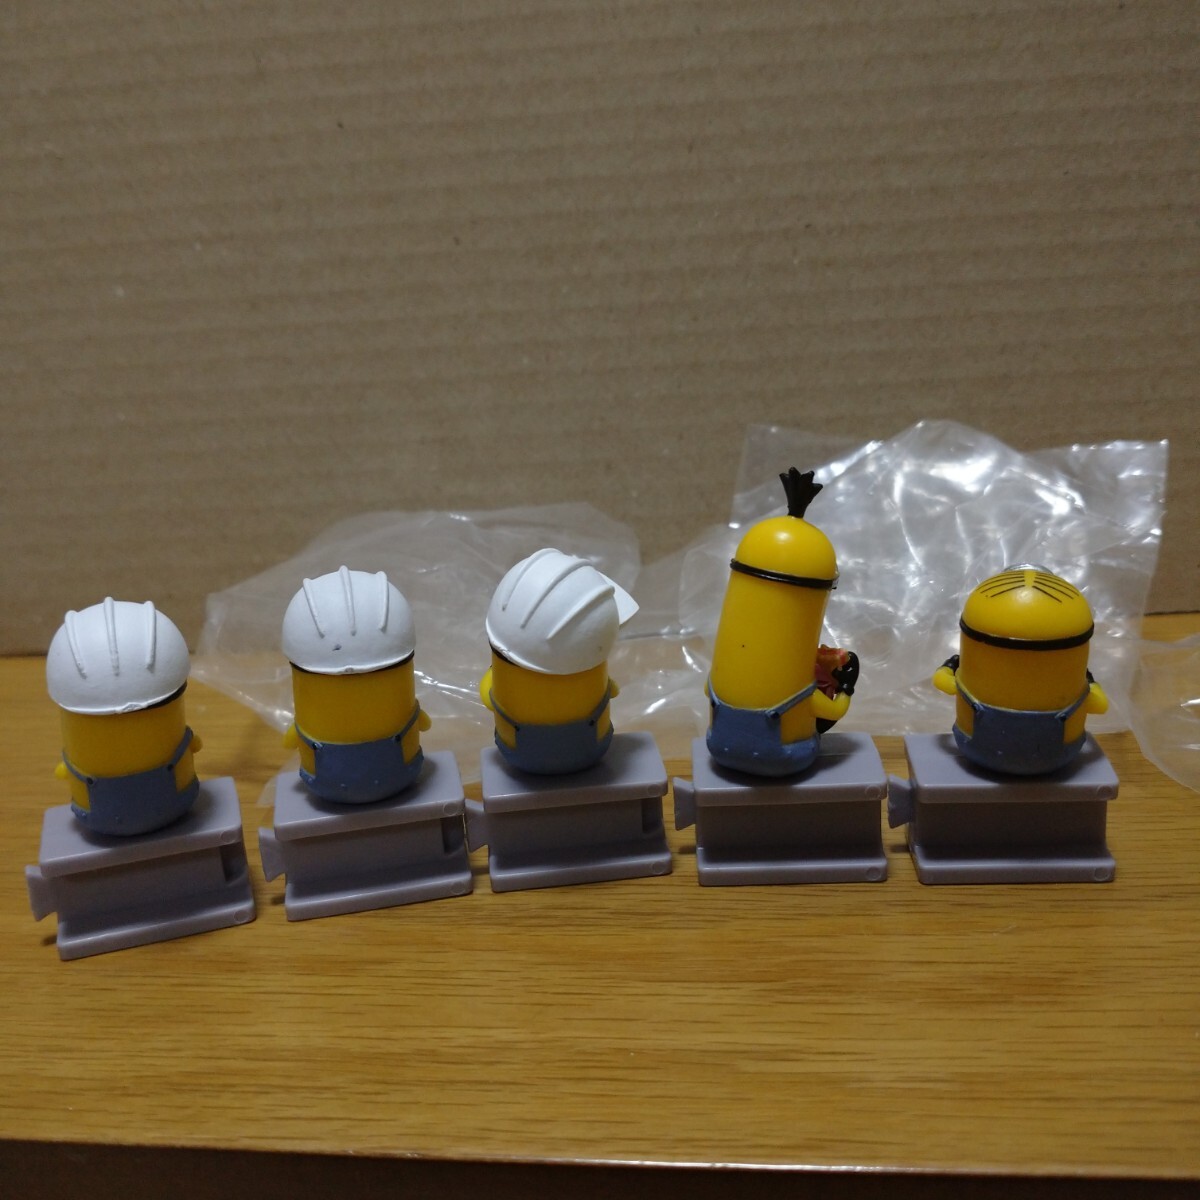 minions minion 工事現場 工事 工場 作業員 フィギュア コレクション ミニオンズ ミニオン パン ご飯 collection toy lunch time figureの画像8